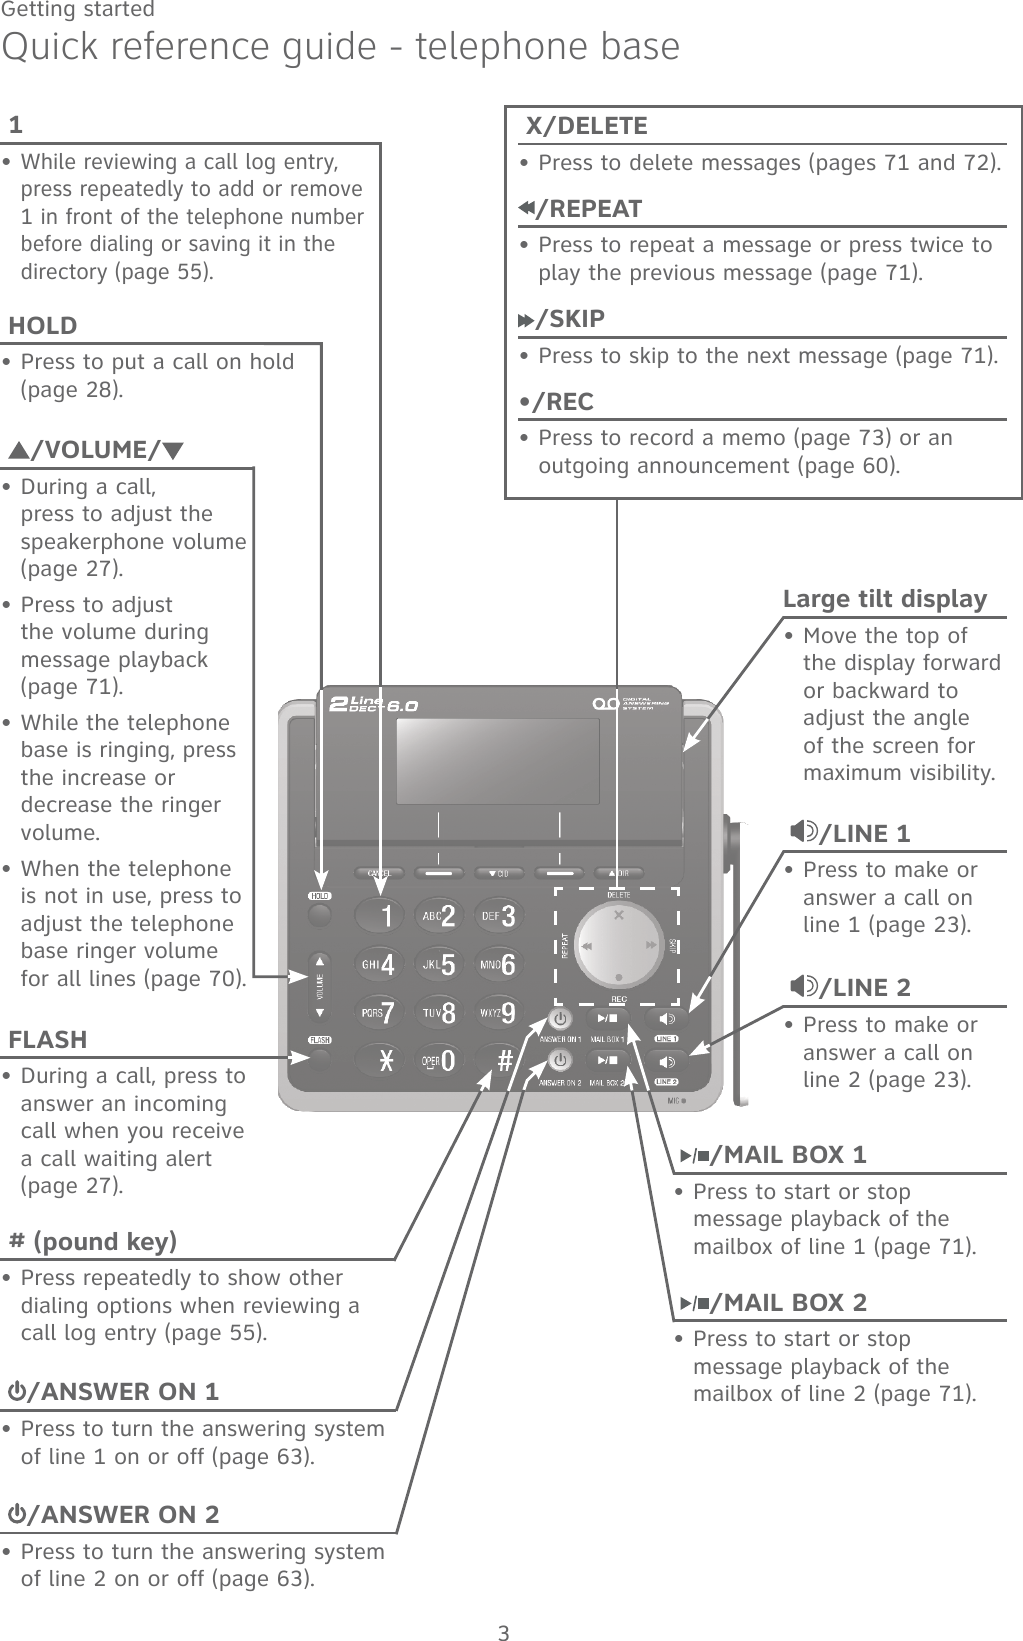 3Getting startedQuick reference guide - telephone base X/DELETEPress to delete messages (pages 71 and 72)./REPEATPress to repeat a message or press twice to play the previous message (page 71)./SKIPPress to skip to the next message (page 71).•/RECPress to record a memo (page 73) or an outgoing announcement (page 60).•••• /MAIL BOX 2Press to start or stop message playback of the mailbox of line 2 (page 71).• /ANSWER ON 2Press to turn the answering system of line 2 on or off (page 63).• /LINE 2Press to make or answer a call on line 2 (page 23).• HOLDPress to put a call on hold (page 28).• /VOLUME/During a call, press to adjust the speakerphone volume (page 27). Press to adjust the volume during message playback (page 71).While the telephone base is ringing, press the increase or decrease the ringer volume.When the telephone is not in use, press to adjust the telephone base ringer volume for all lines (page 70).•••• # (pound key)Press repeatedly to show other dialing options when reviewing a call log entry (page 55).• /ANSWER ON 1Press to turn the answering system of line 1 on or off (page 63).• /MAIL BOX 1Press to start or stop message playback of the mailbox of line 1 (page 71).• /LINE 1Press to make or answer a call on line 1 (page 23).• 1While reviewing a call log entry, press repeatedly to add or remove 1 in front of the telephone number before dialing or saving it in thedirectory (page 55).• FLASHDuring a call, press to answer an incoming call when you receive a call waiting alert (page 27).•Large tilt displayMove the top of the display forward or backward to adjust the angle of the screen for maximum visibility.•